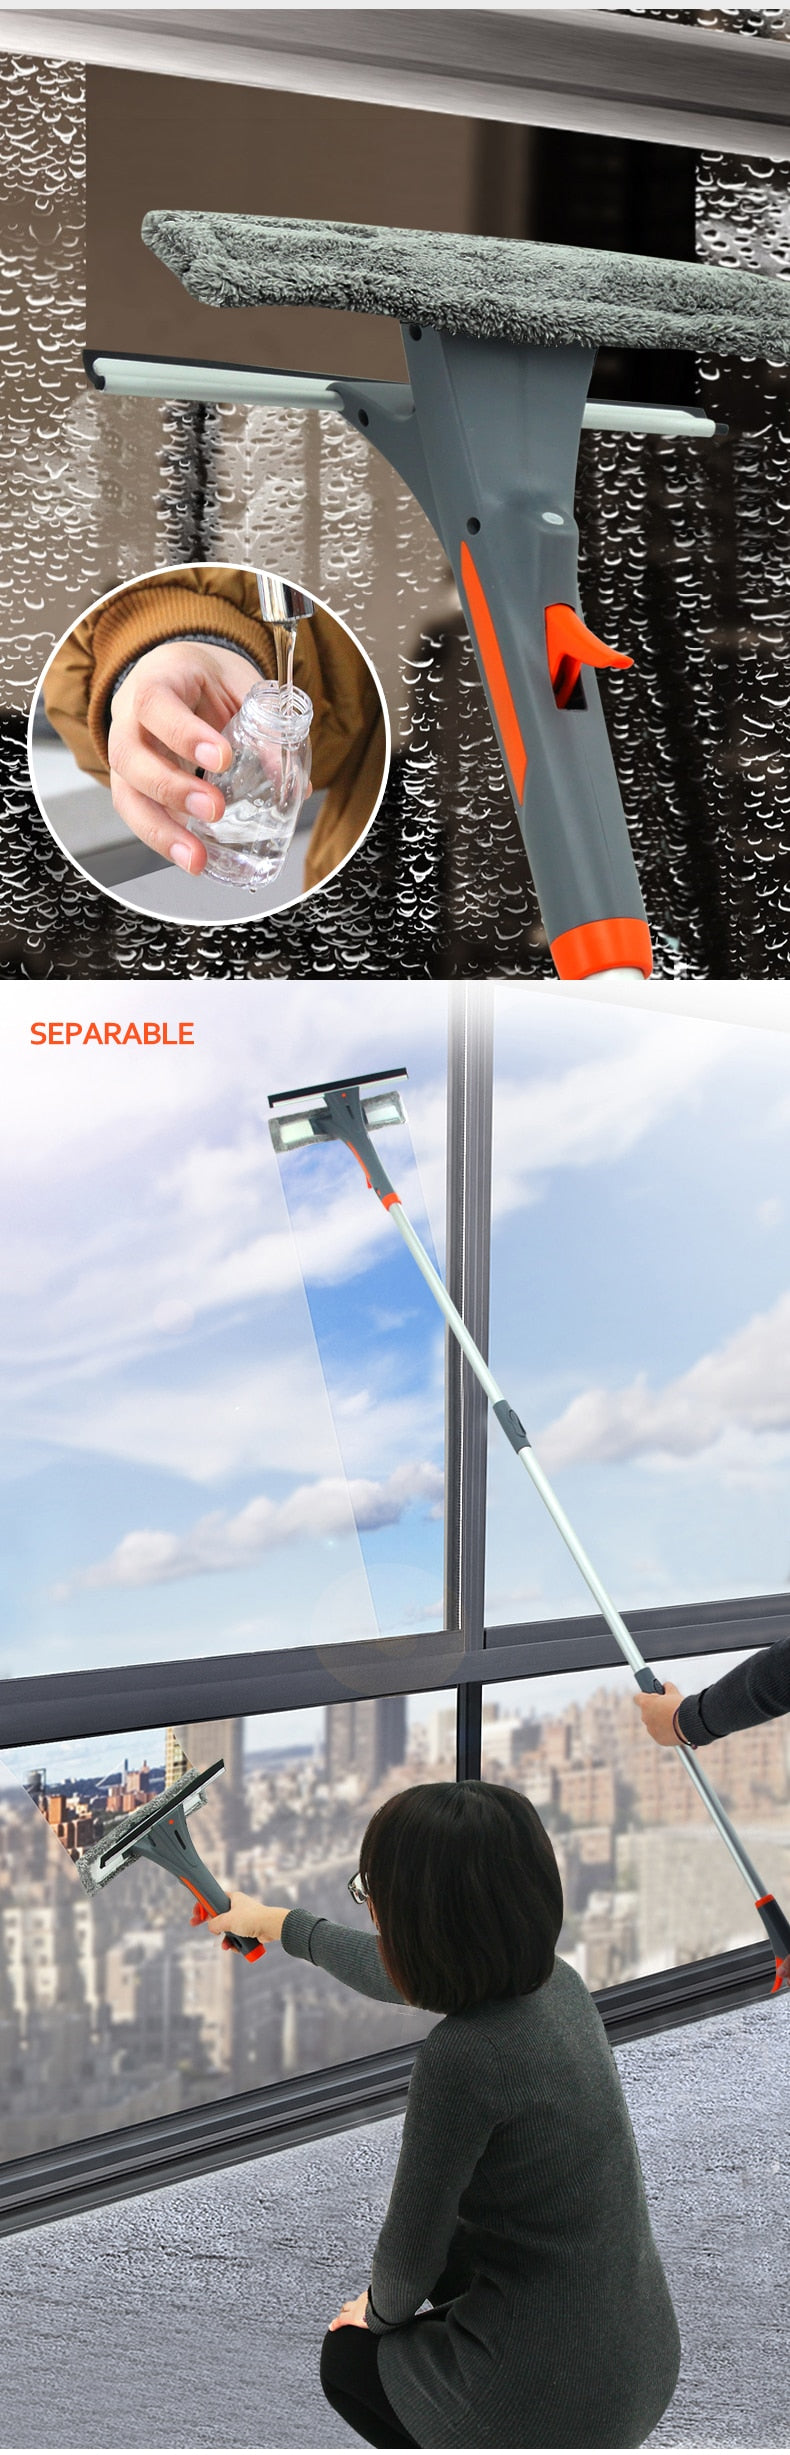 Extendable Window Squeegee with Spray, 3 in 1 Window Squeegee Cleaner